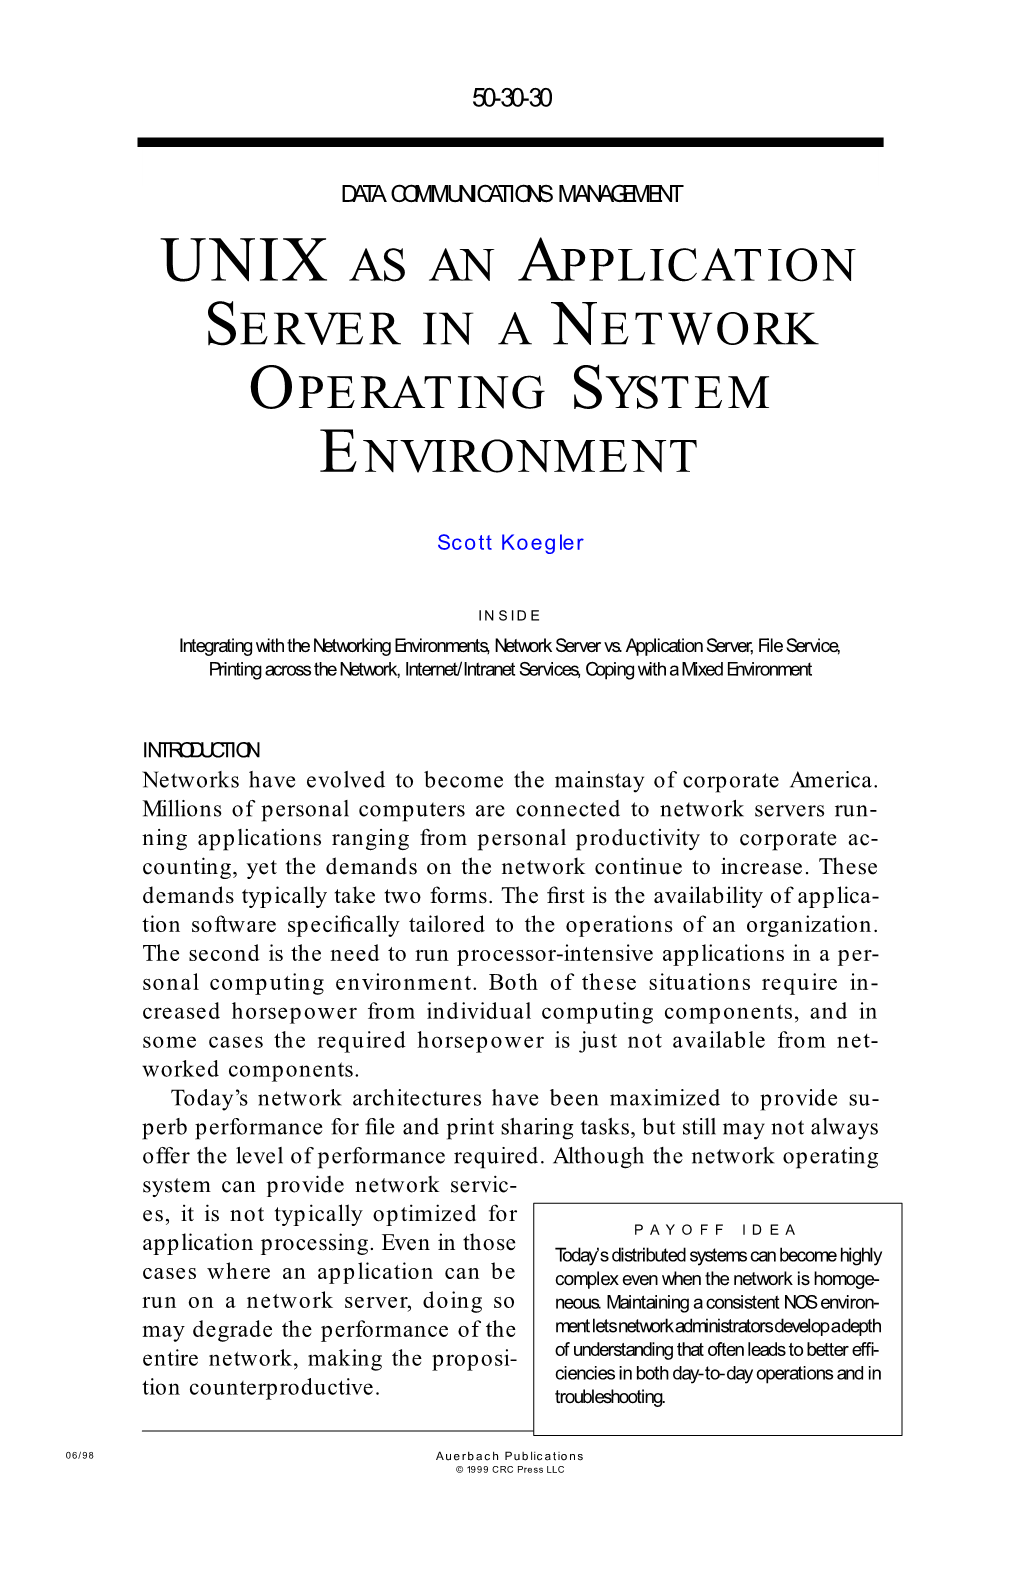 Unix As an Application Server in a Network Operating System Environment